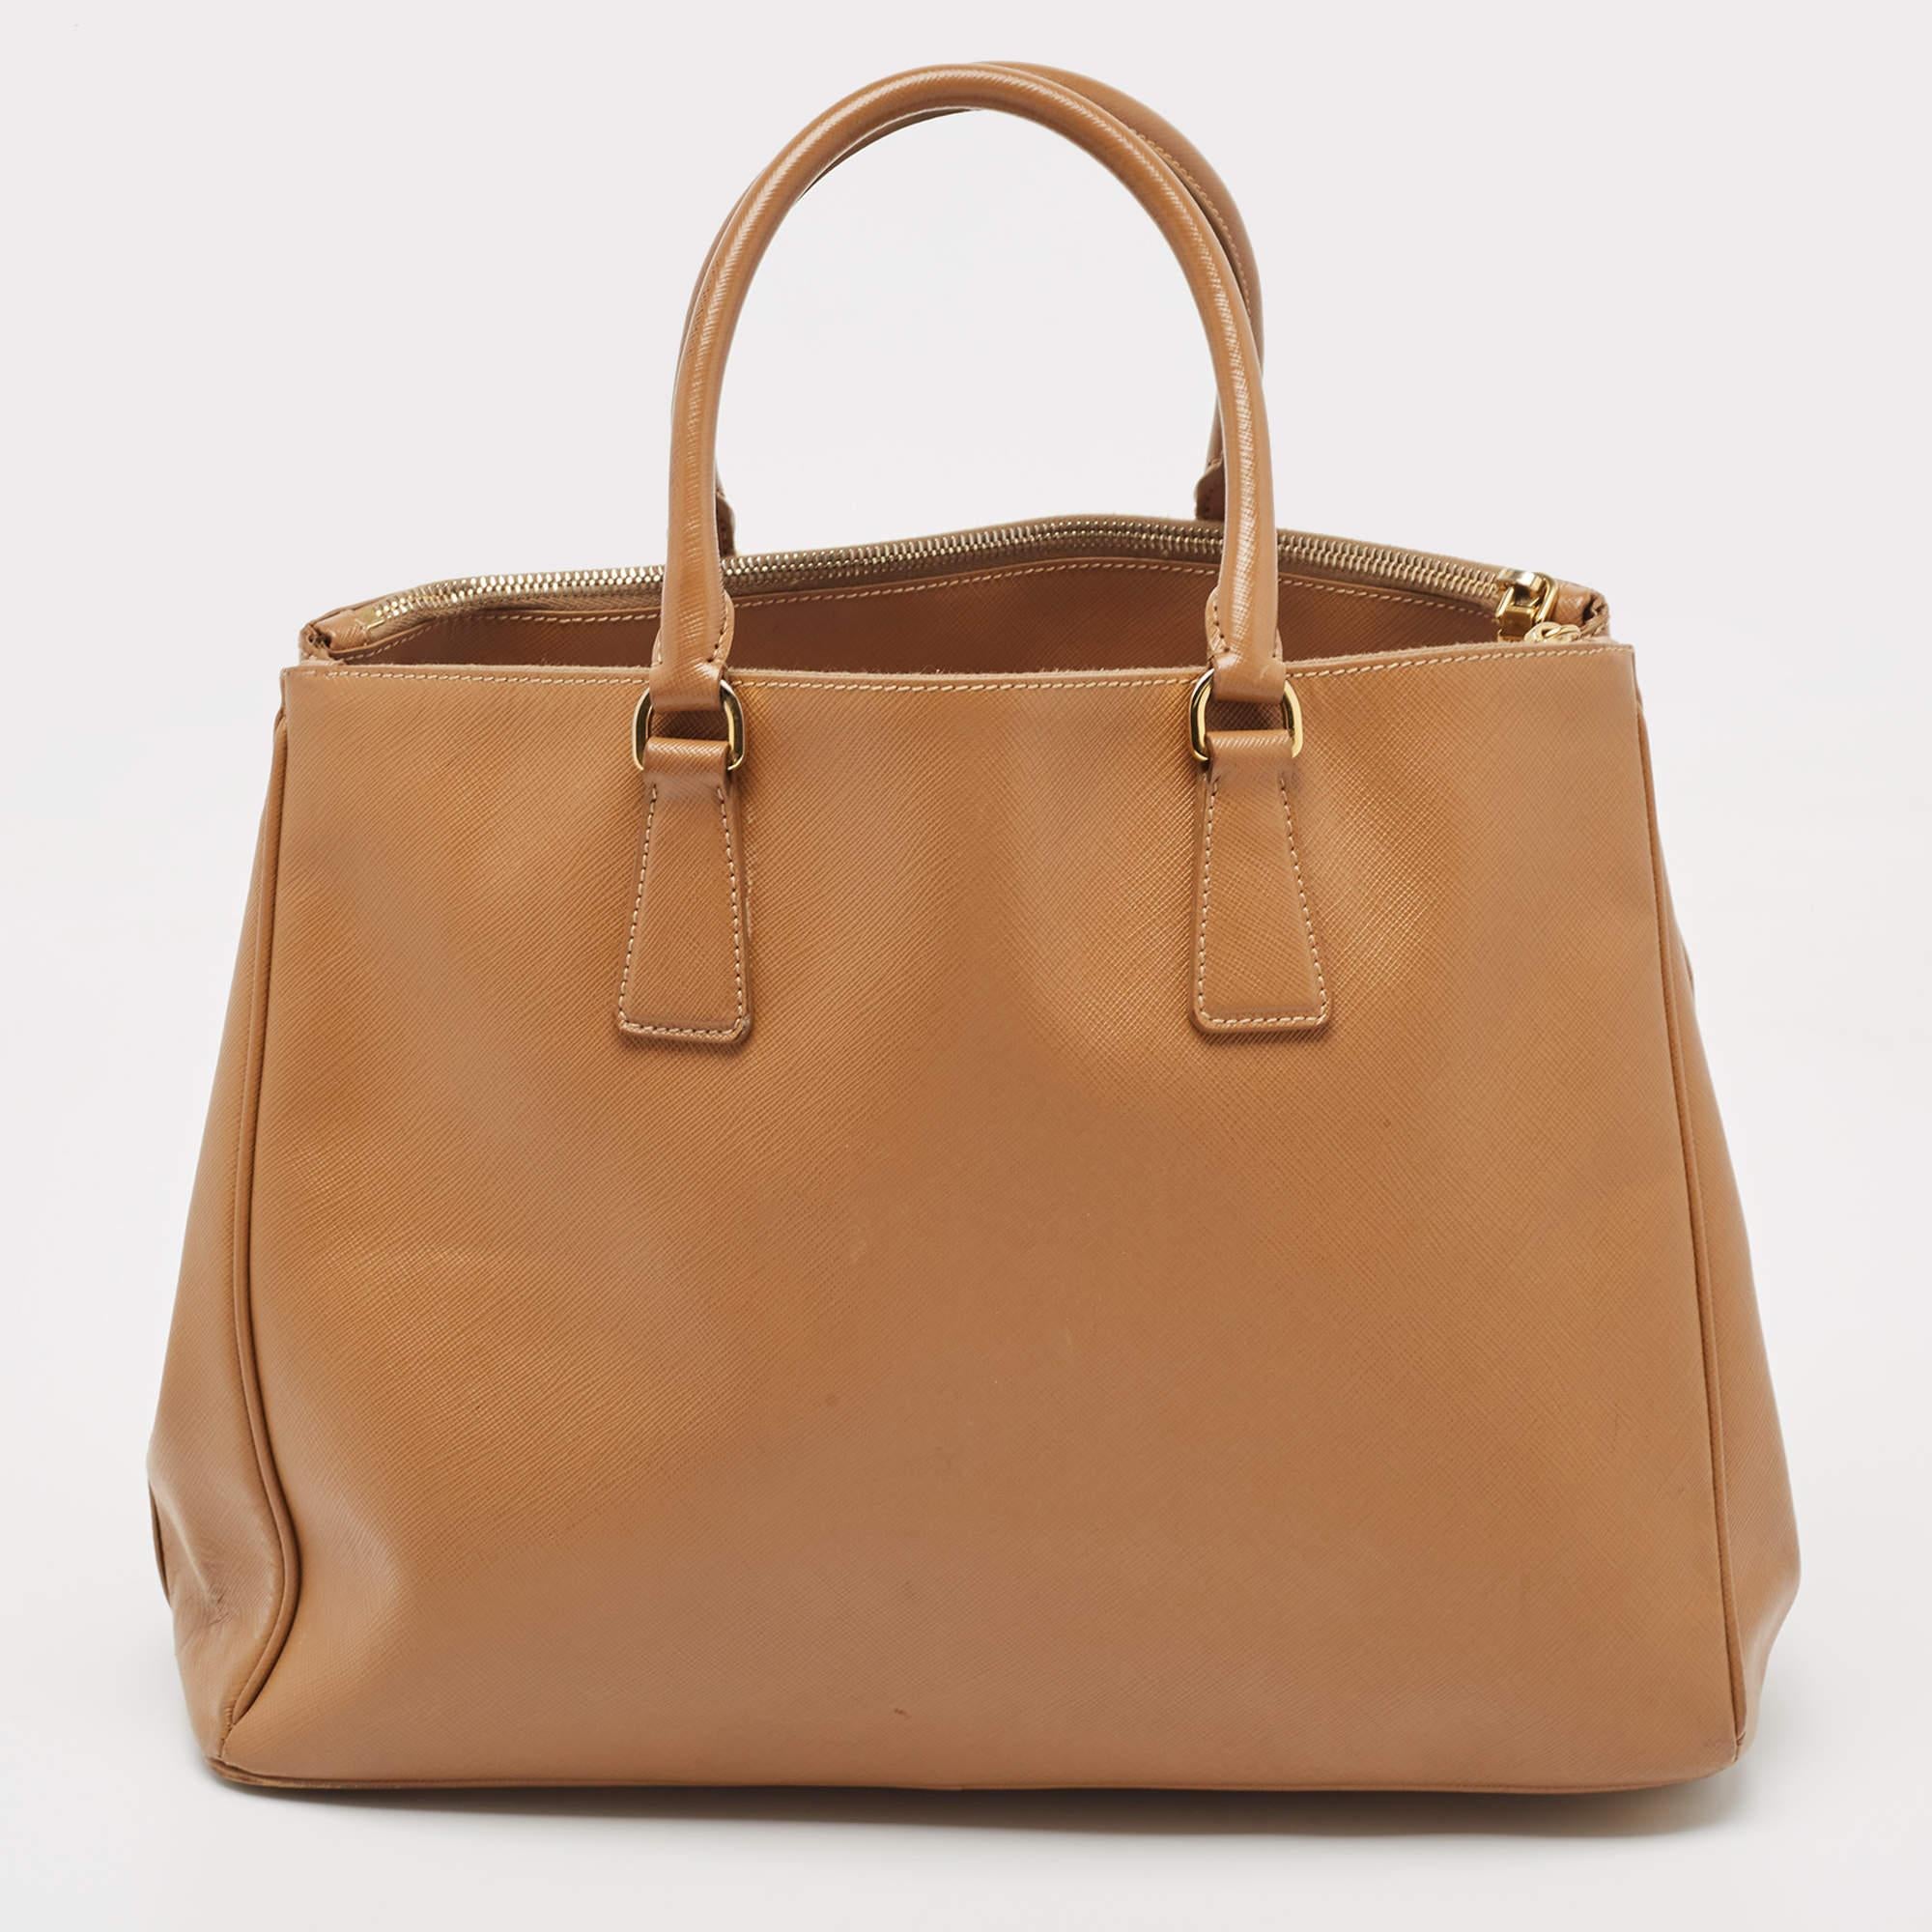 Feminine in shape and grand in design, this Double Zip tote by Prada will be a valuable addition to your closet. It has been crafted from Saffiano leather and styled minimally with gold-tone hardware. It comes with dual handles at the top, two zip